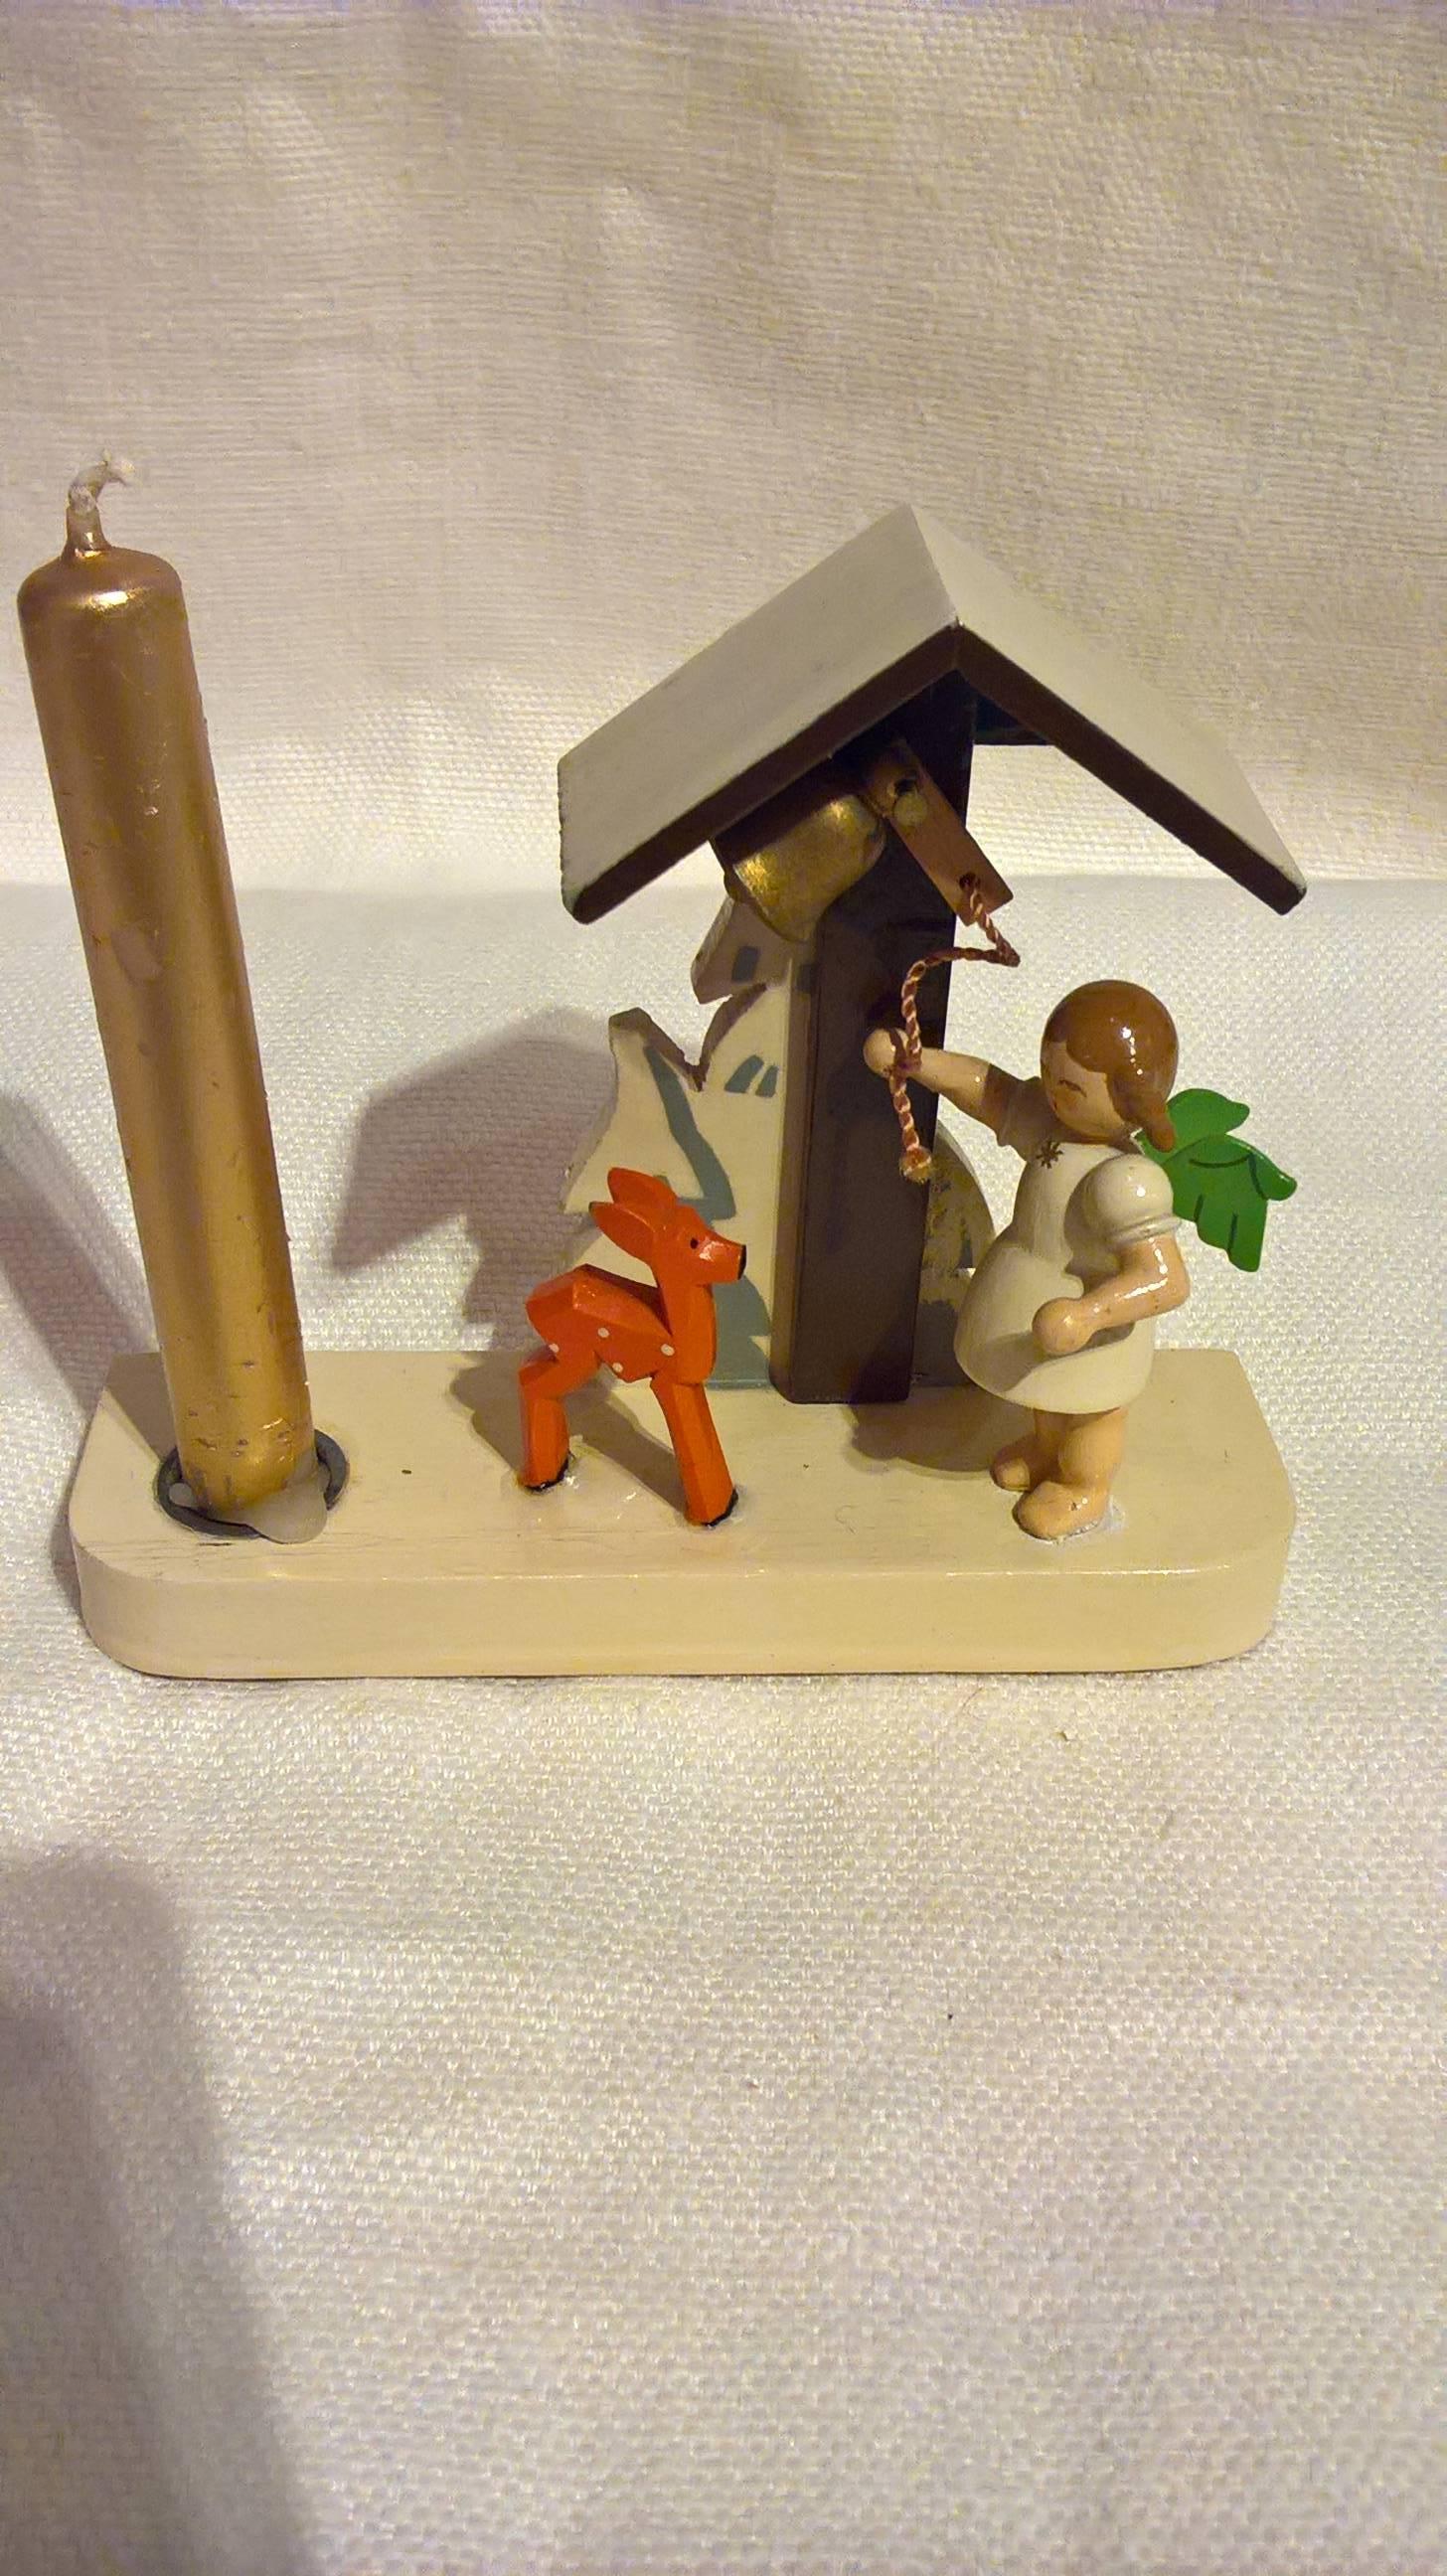 Folk Art Vintage Pair of Christmas Figures with Candlestick from Erzgebirge